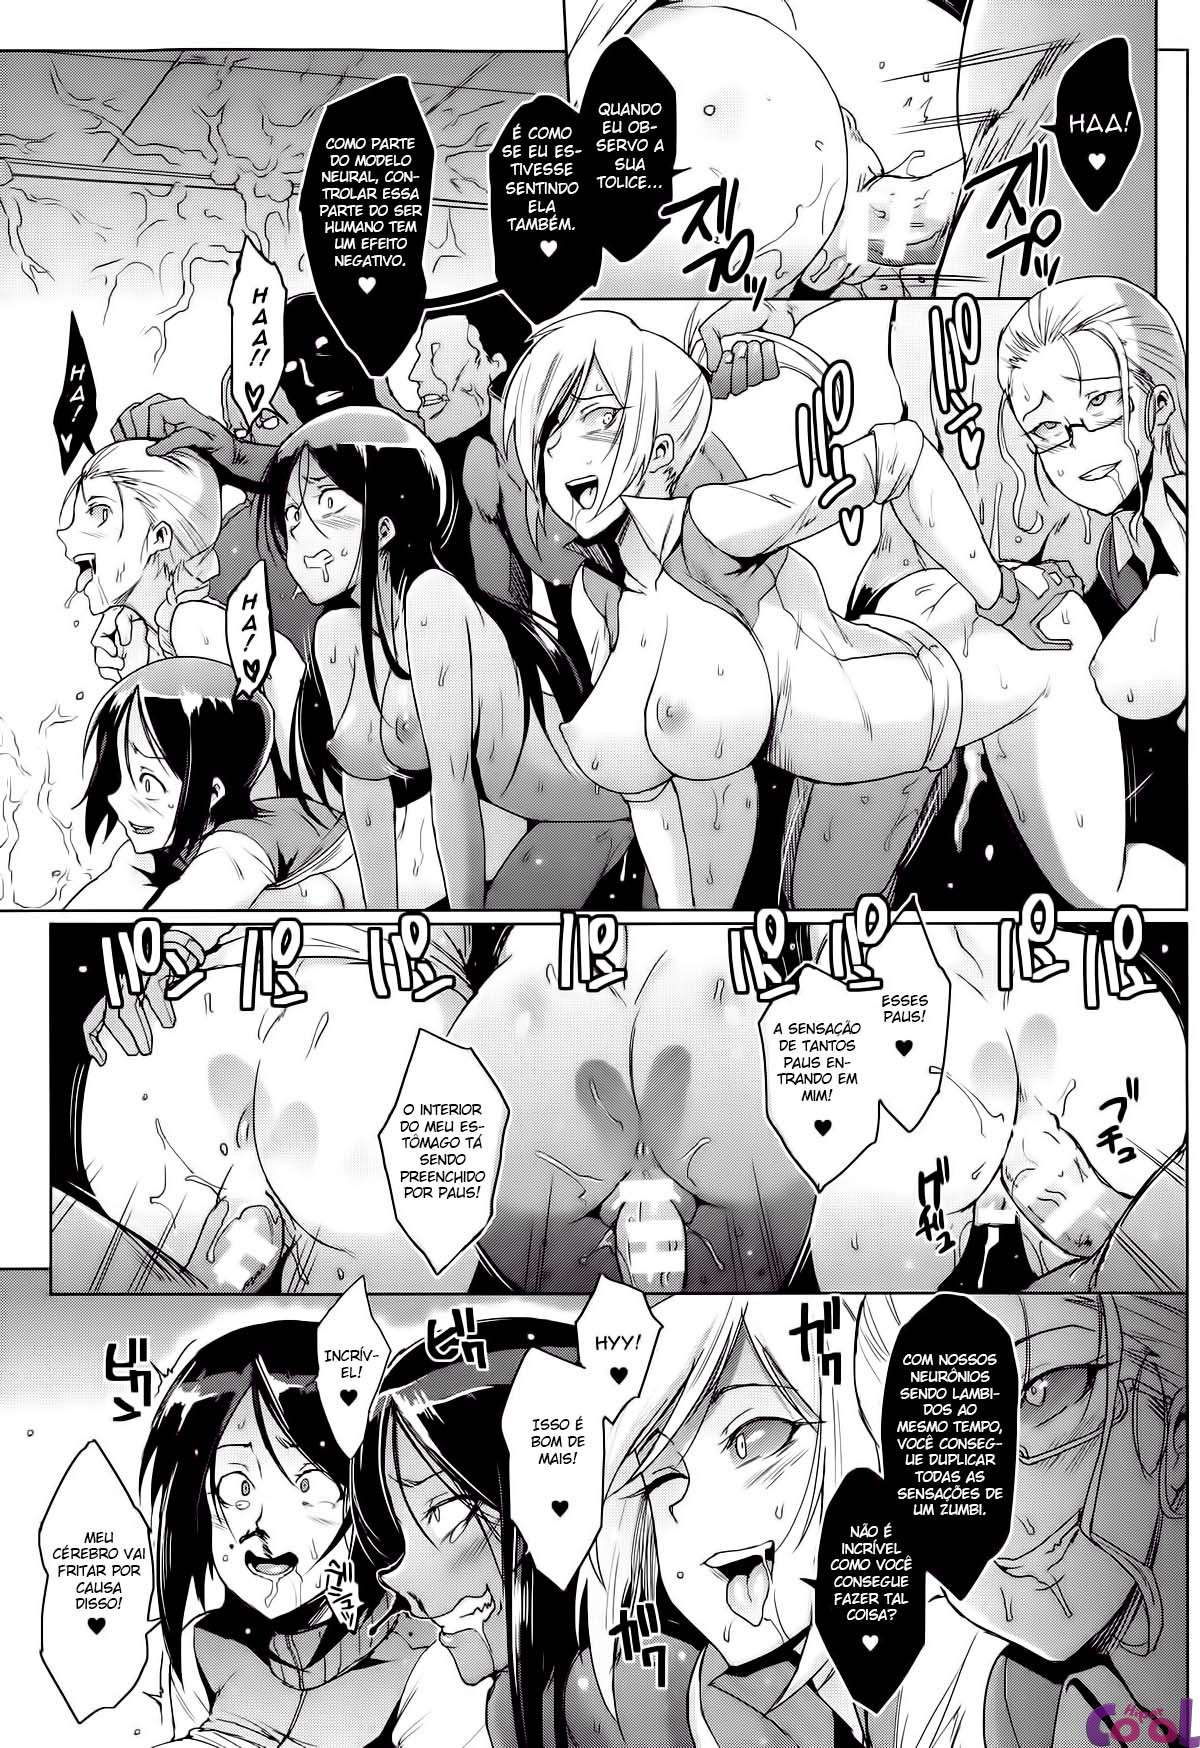 the-voodoo-squad-kouhen-chapter-01-page-19.jpg